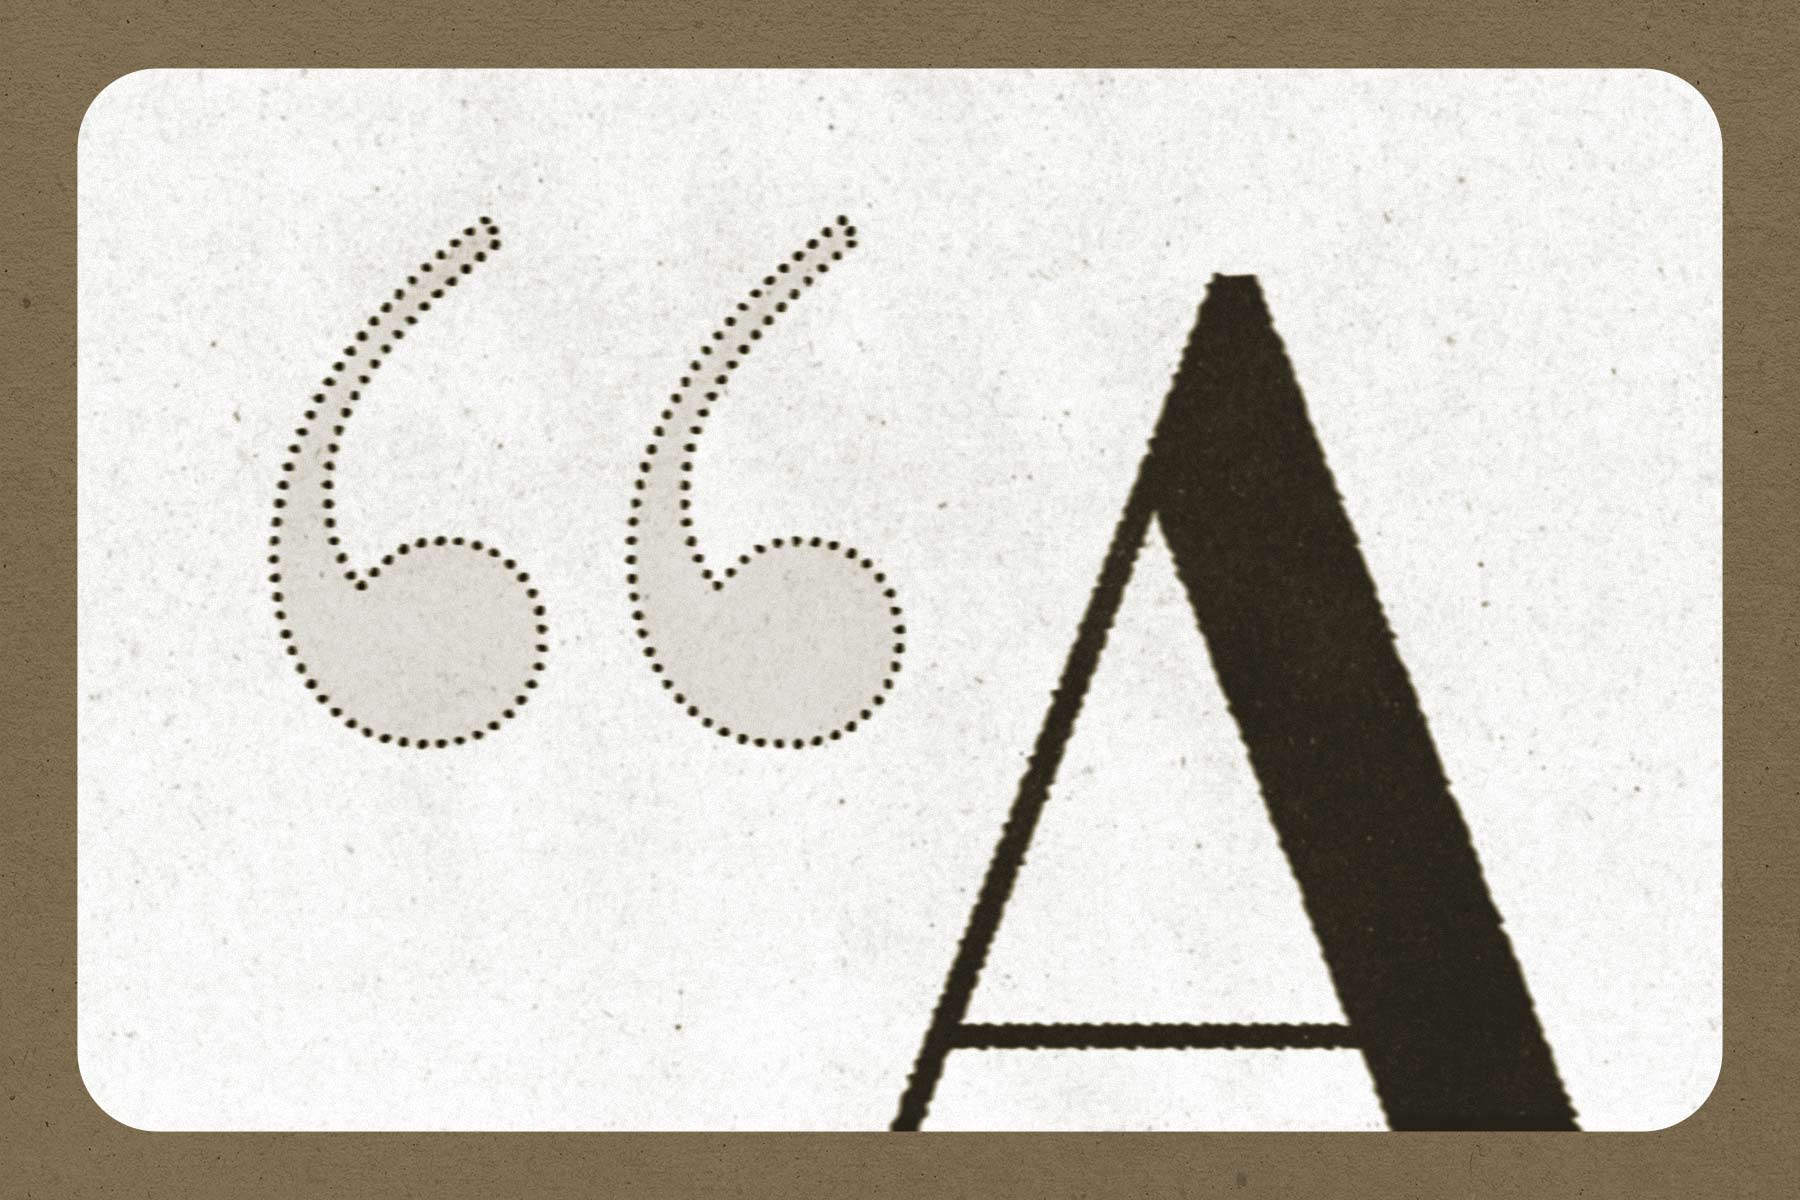 A photo illustration of a feint opening quotation mark in front of a capital letter A. There is a beige border around the image.